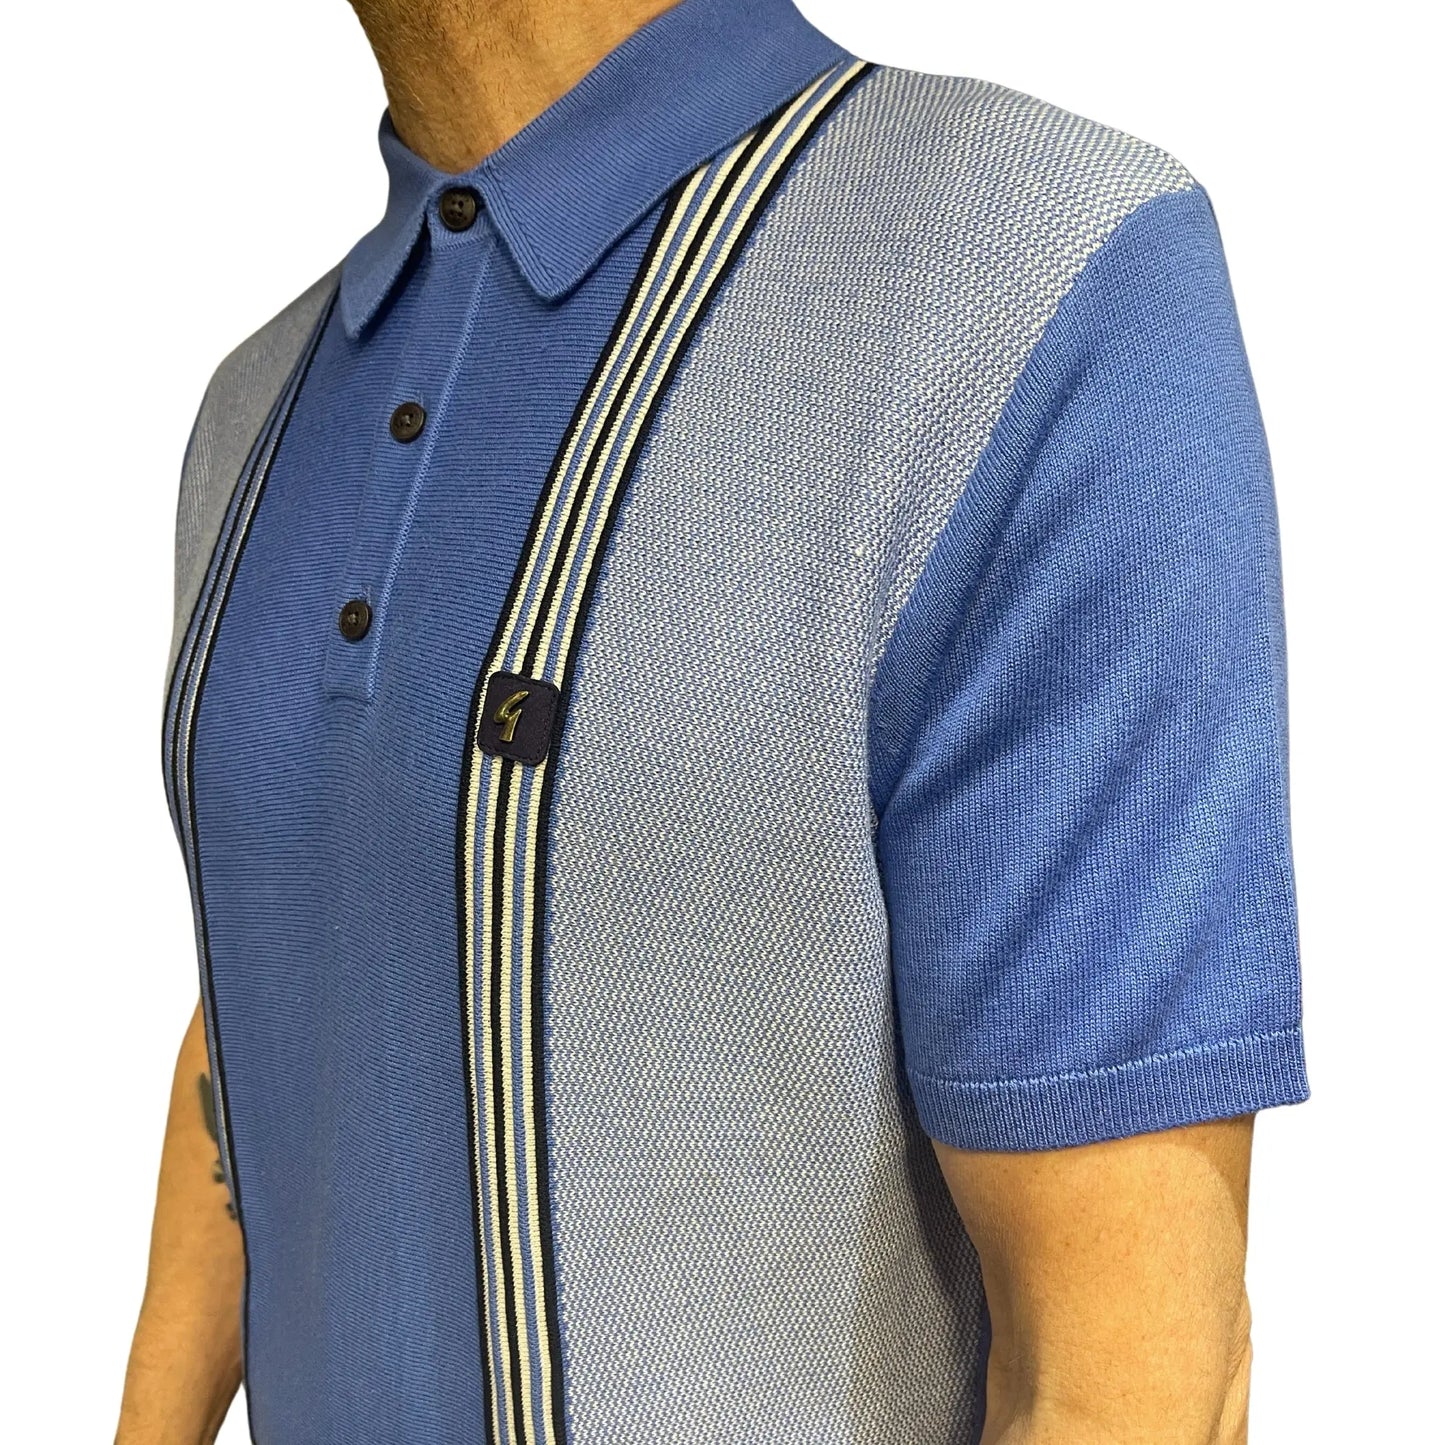 Buy Gabicci Vintage Eden Knitted Polo Shirt - Thames | Short-Sleeved Polo Shirtss at Woven Durham